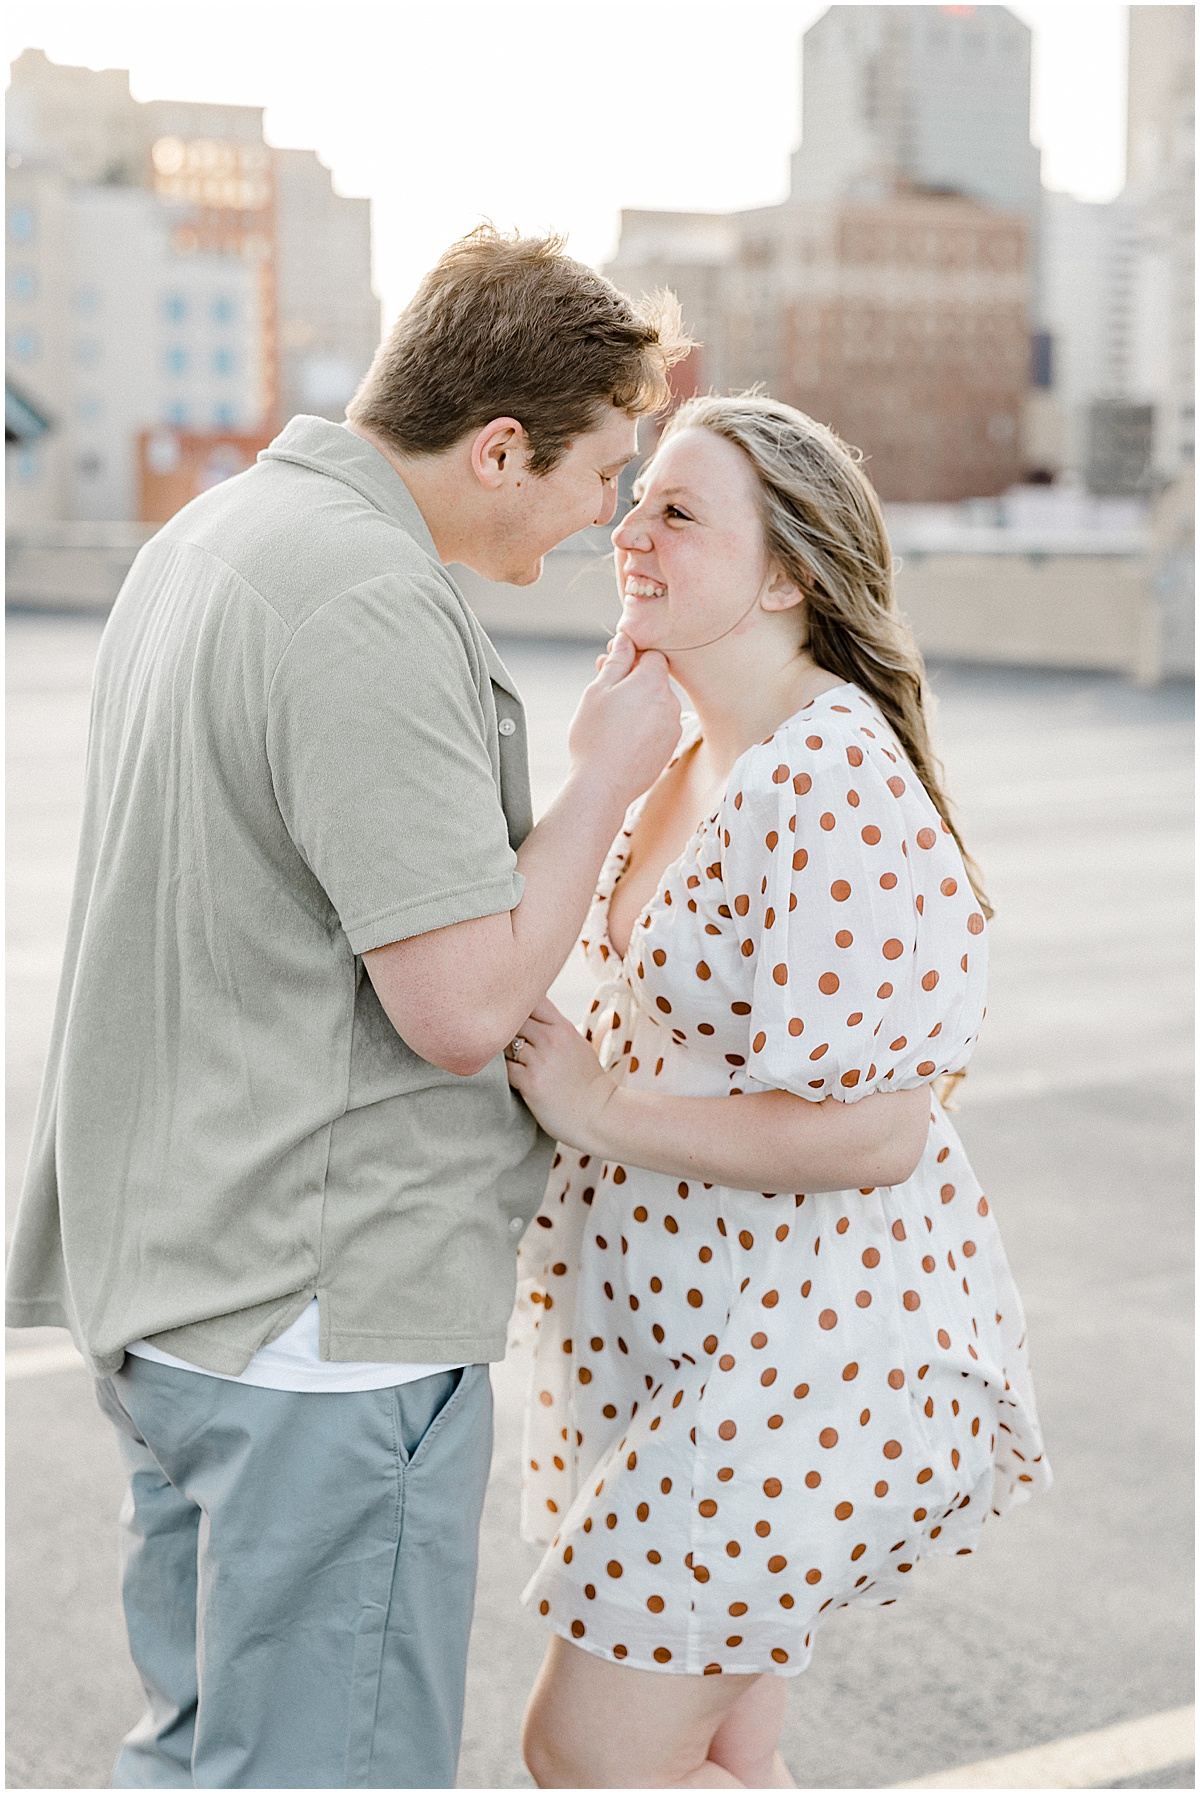 Indianapolis engagement photos on the rooftop of a parking garage.